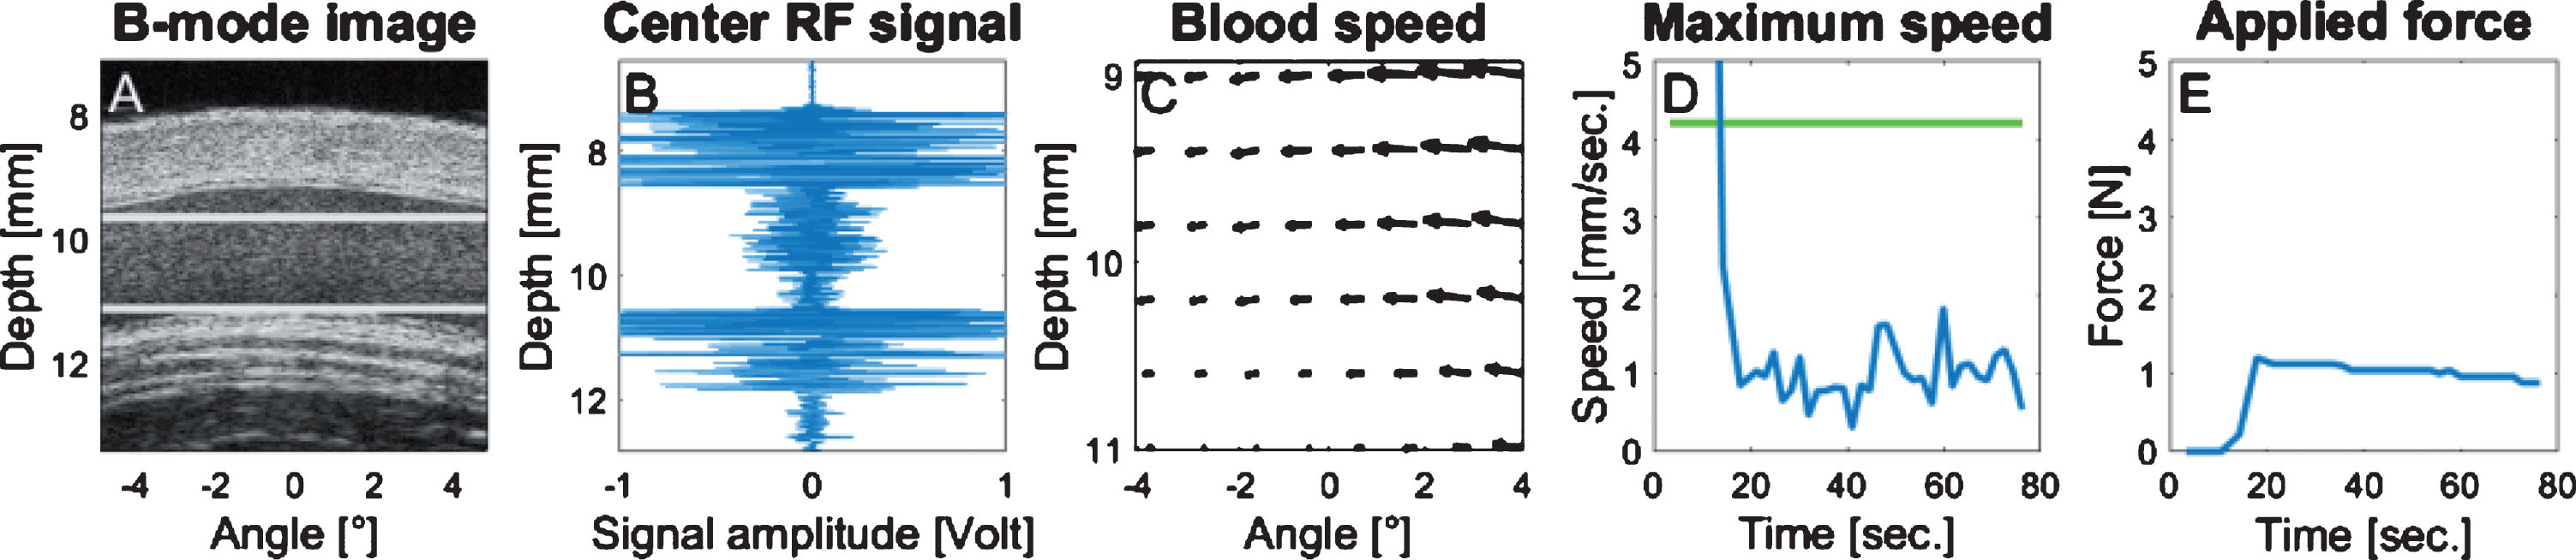 Illustration of the control panel used during data acquisition. Each panel was automatically refreshed over time. (A) Longitudinal B-mode image of the vein; (B) acquired radiofrequency ultrasound data (depth versus normalized amplitude); (C) displacement map of the blood flow, the length of each vector corresponds to the instant displacement. The blood speed map region corresponds to the region delimited by the 2 white horizontal lines within the flow stream of panel A. (D) Maximum flow velocity within the blood speed map over time (in mm/s versus s), the green line corresponds to the threshold limit according to the vein diameter; (E) force applied by the bracelet and monitored by the force sensor over time (in Newton versus s).